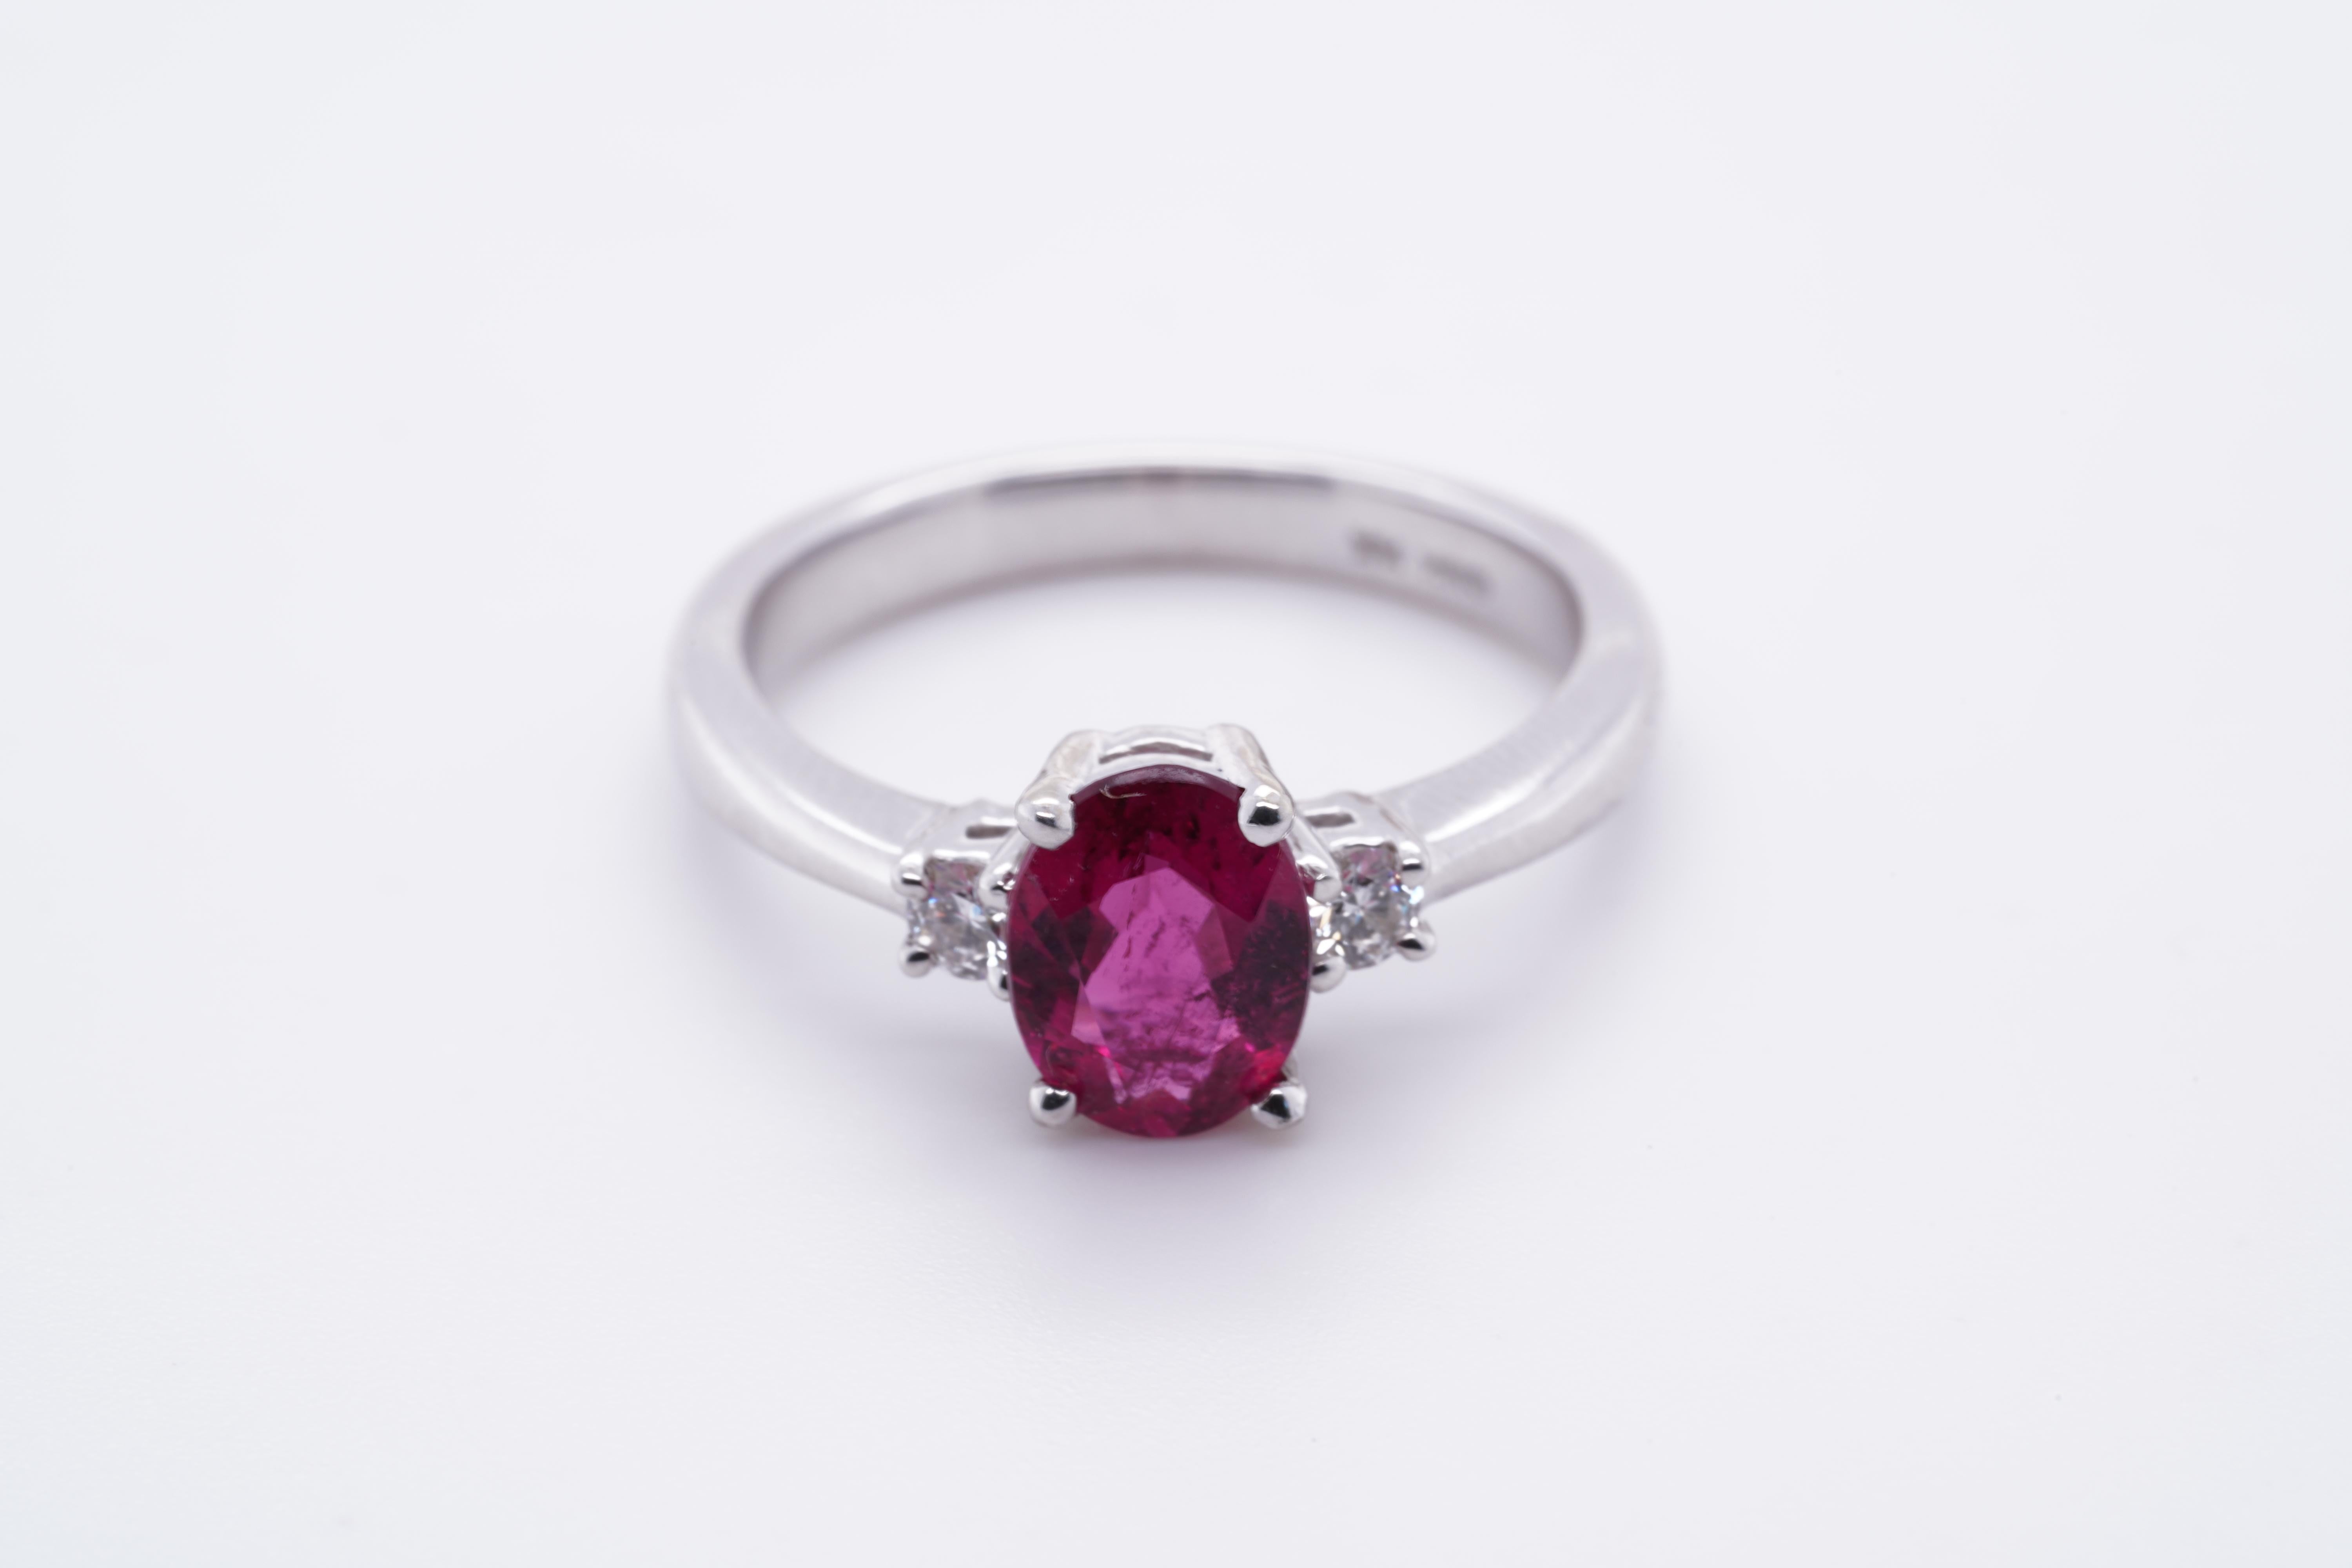 Bright, Pink, Oval Tourmaline Engagement Ring with Diamonds, 14K White Gold 9